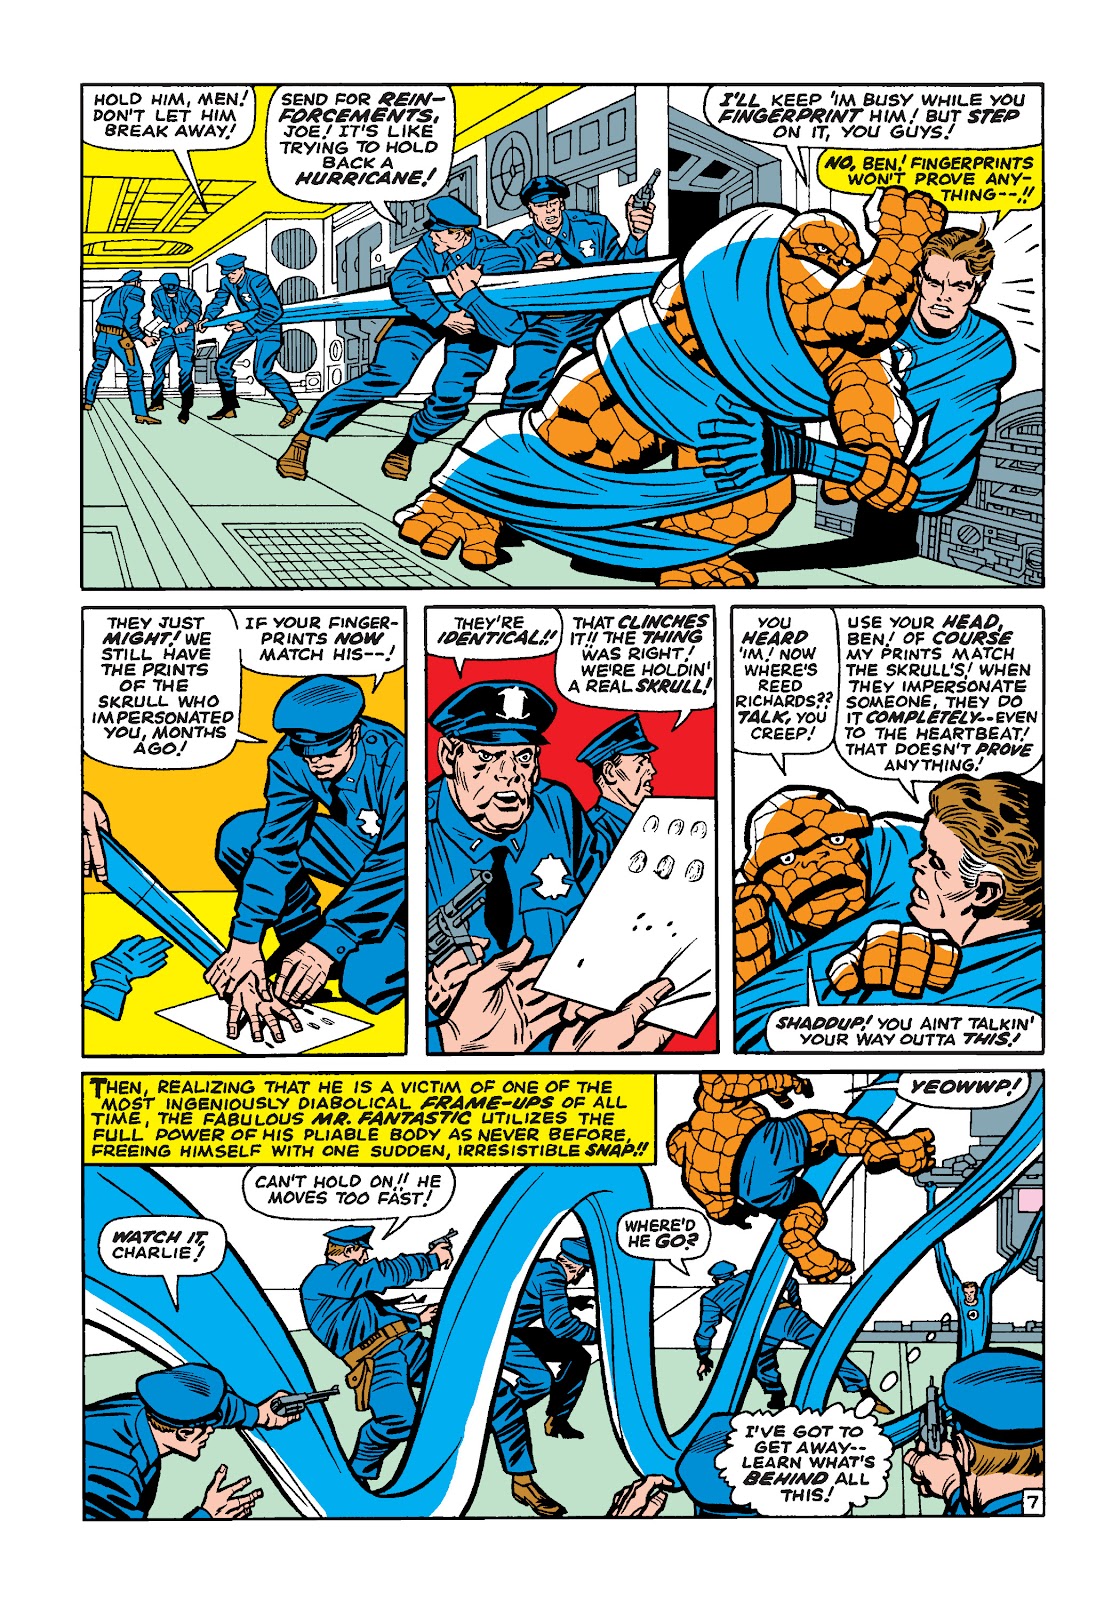 Read online Marvel Masterworks: The Fantastic Four comic - Issue # TPB 4 (Part 2) - 29